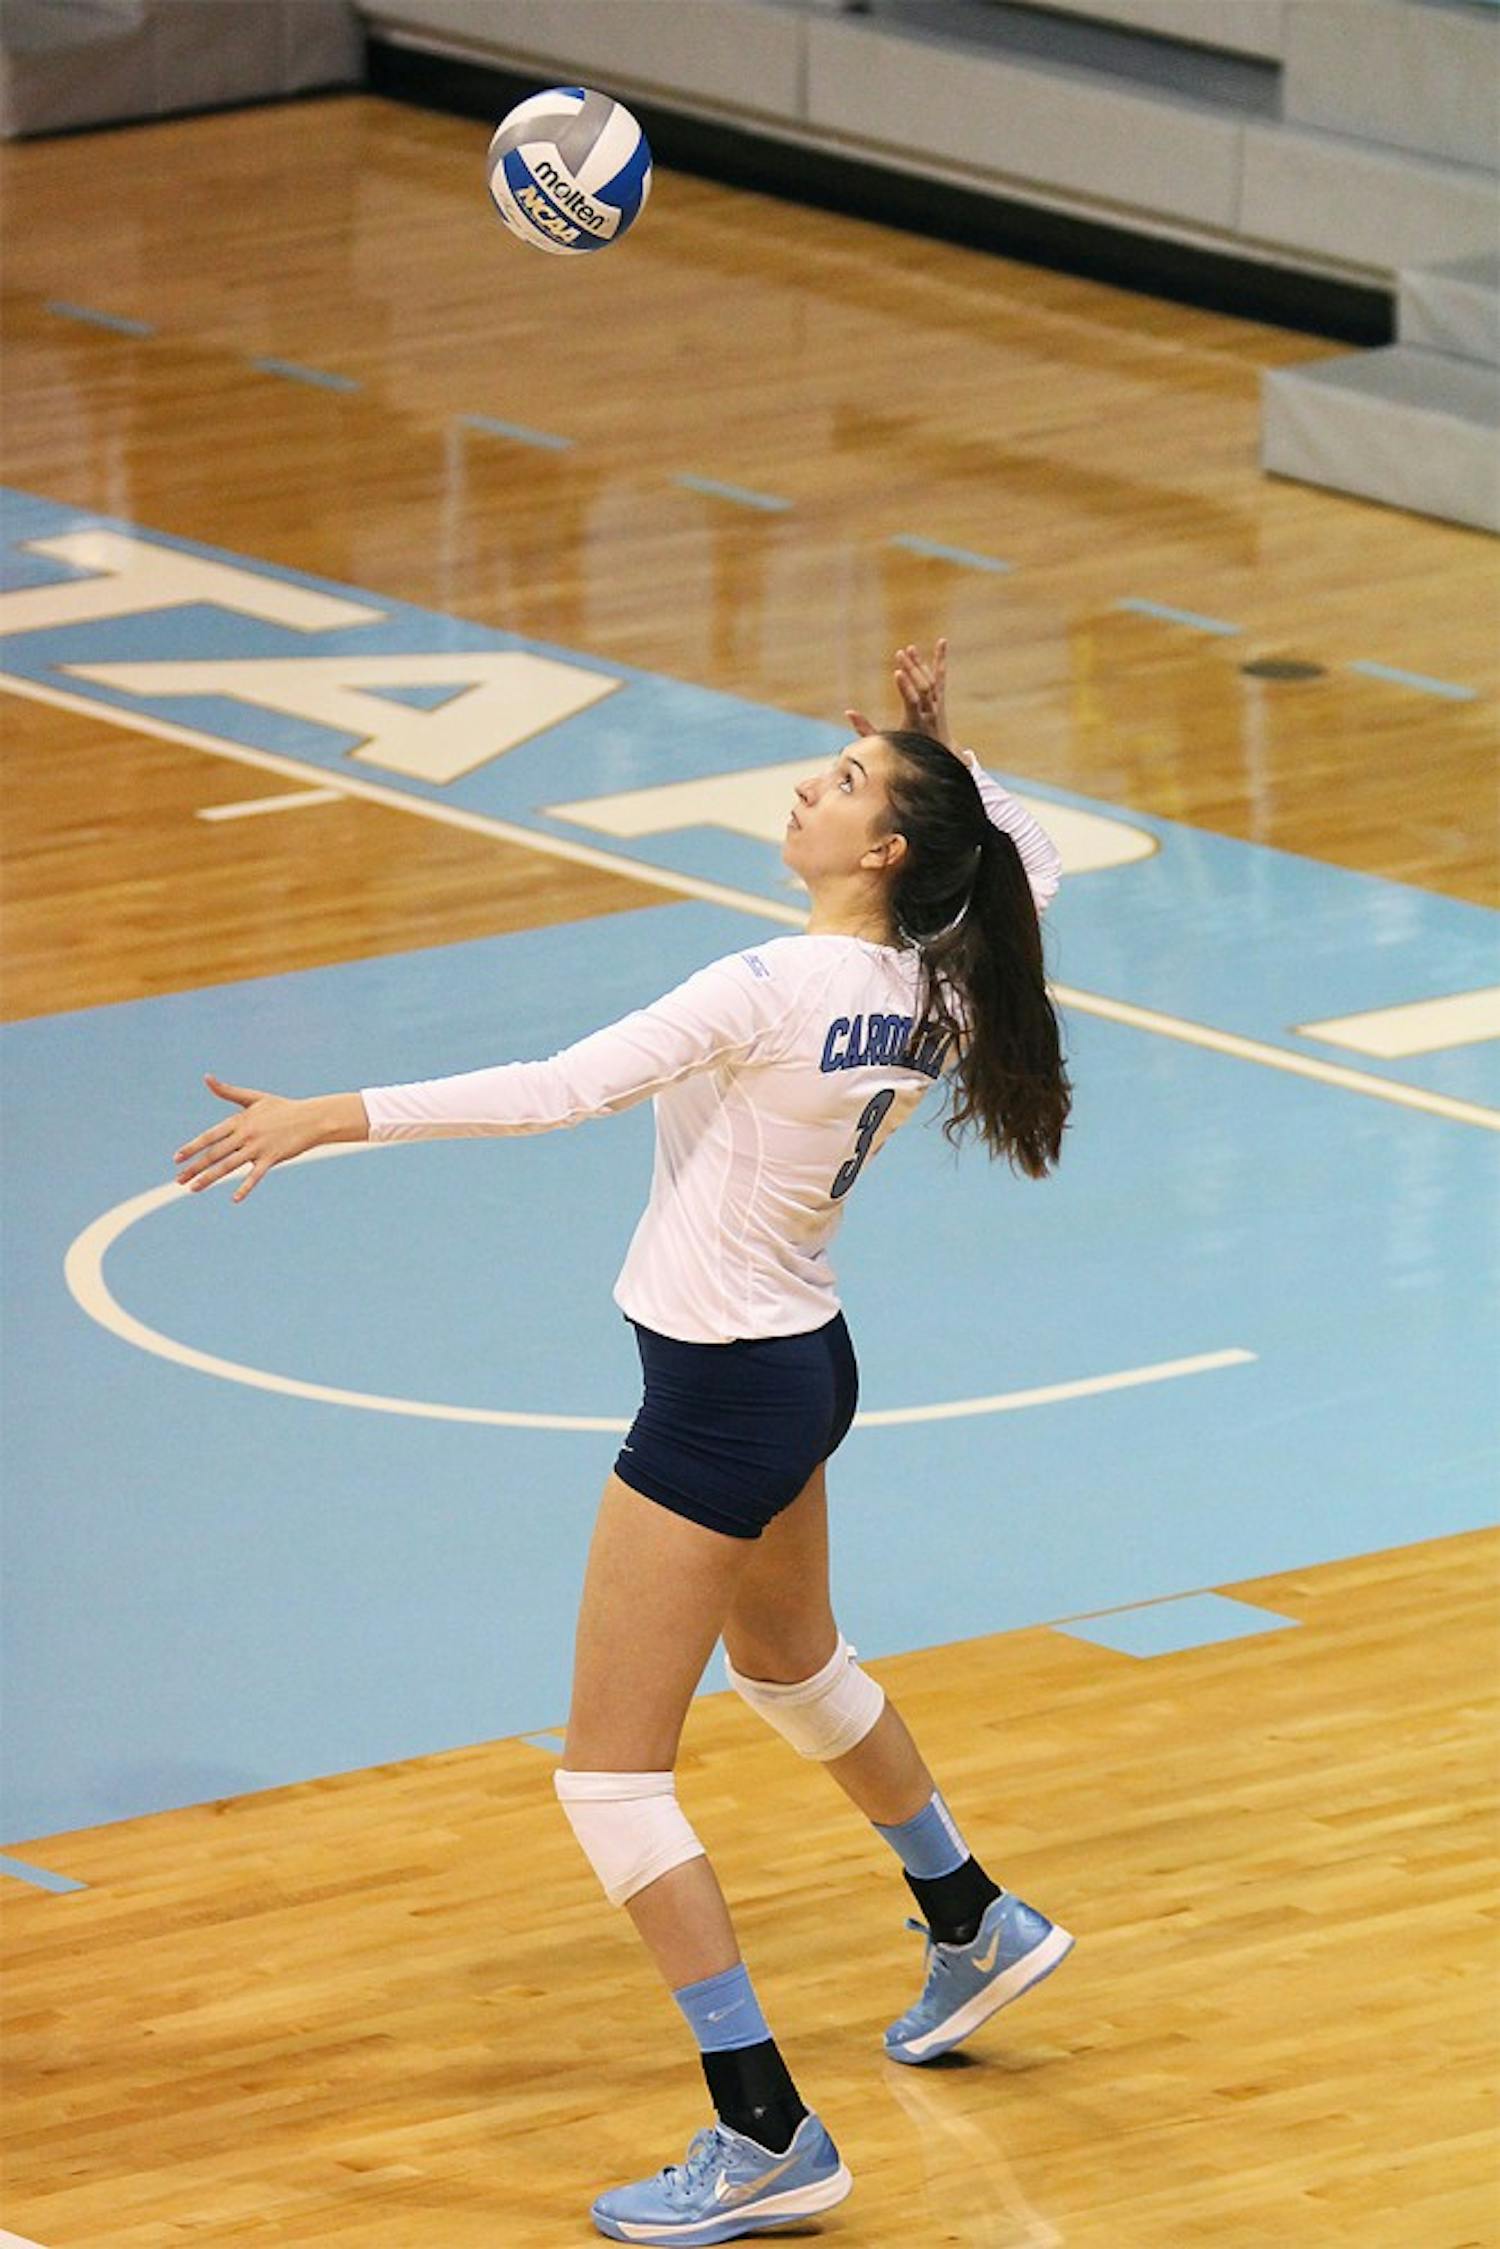 Freshman middle blocker Beth Nordhorn serves the ball during the Tar Heel's victory over NC State.  Nordhorn finished the match with two blocks and one kill.